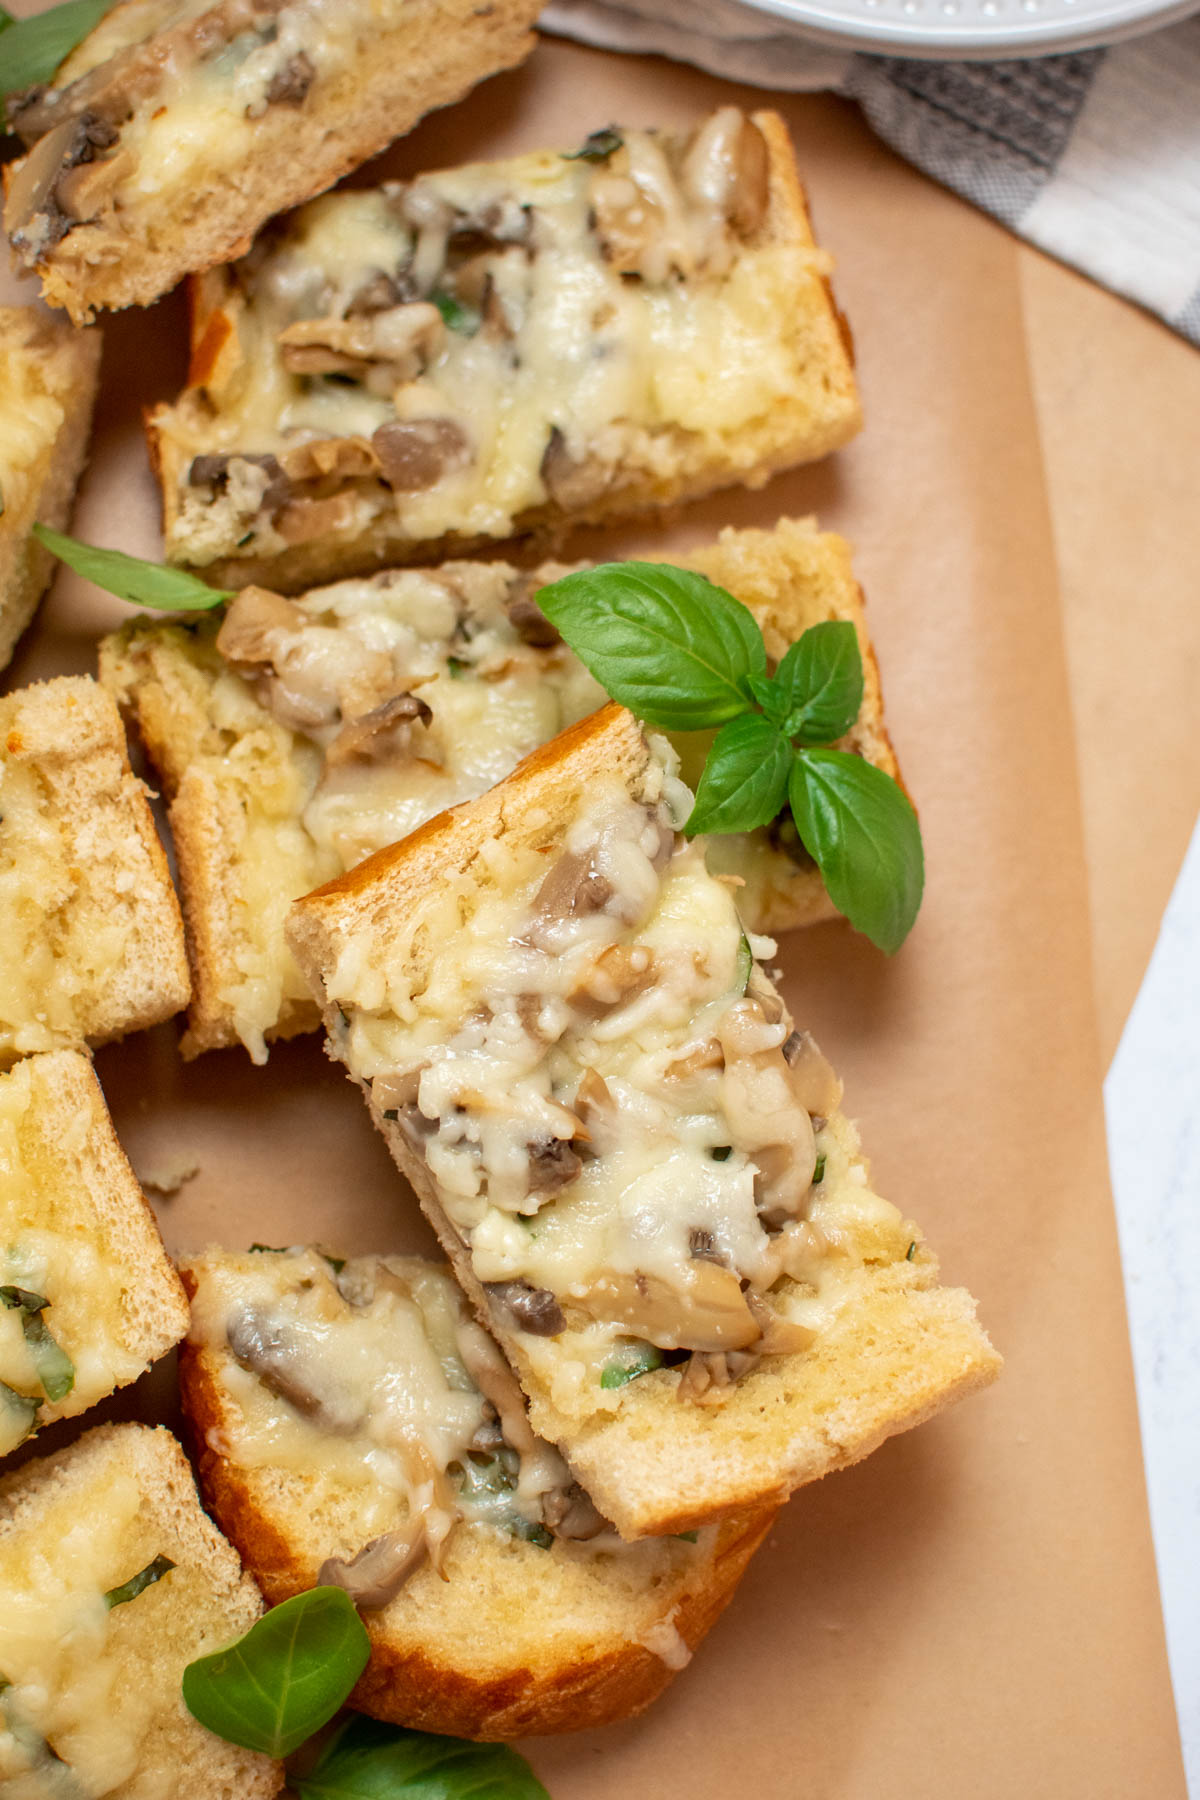 Pieces of cheesy mushroom bread garnished with fresh basil leaves on brown parchment paper.